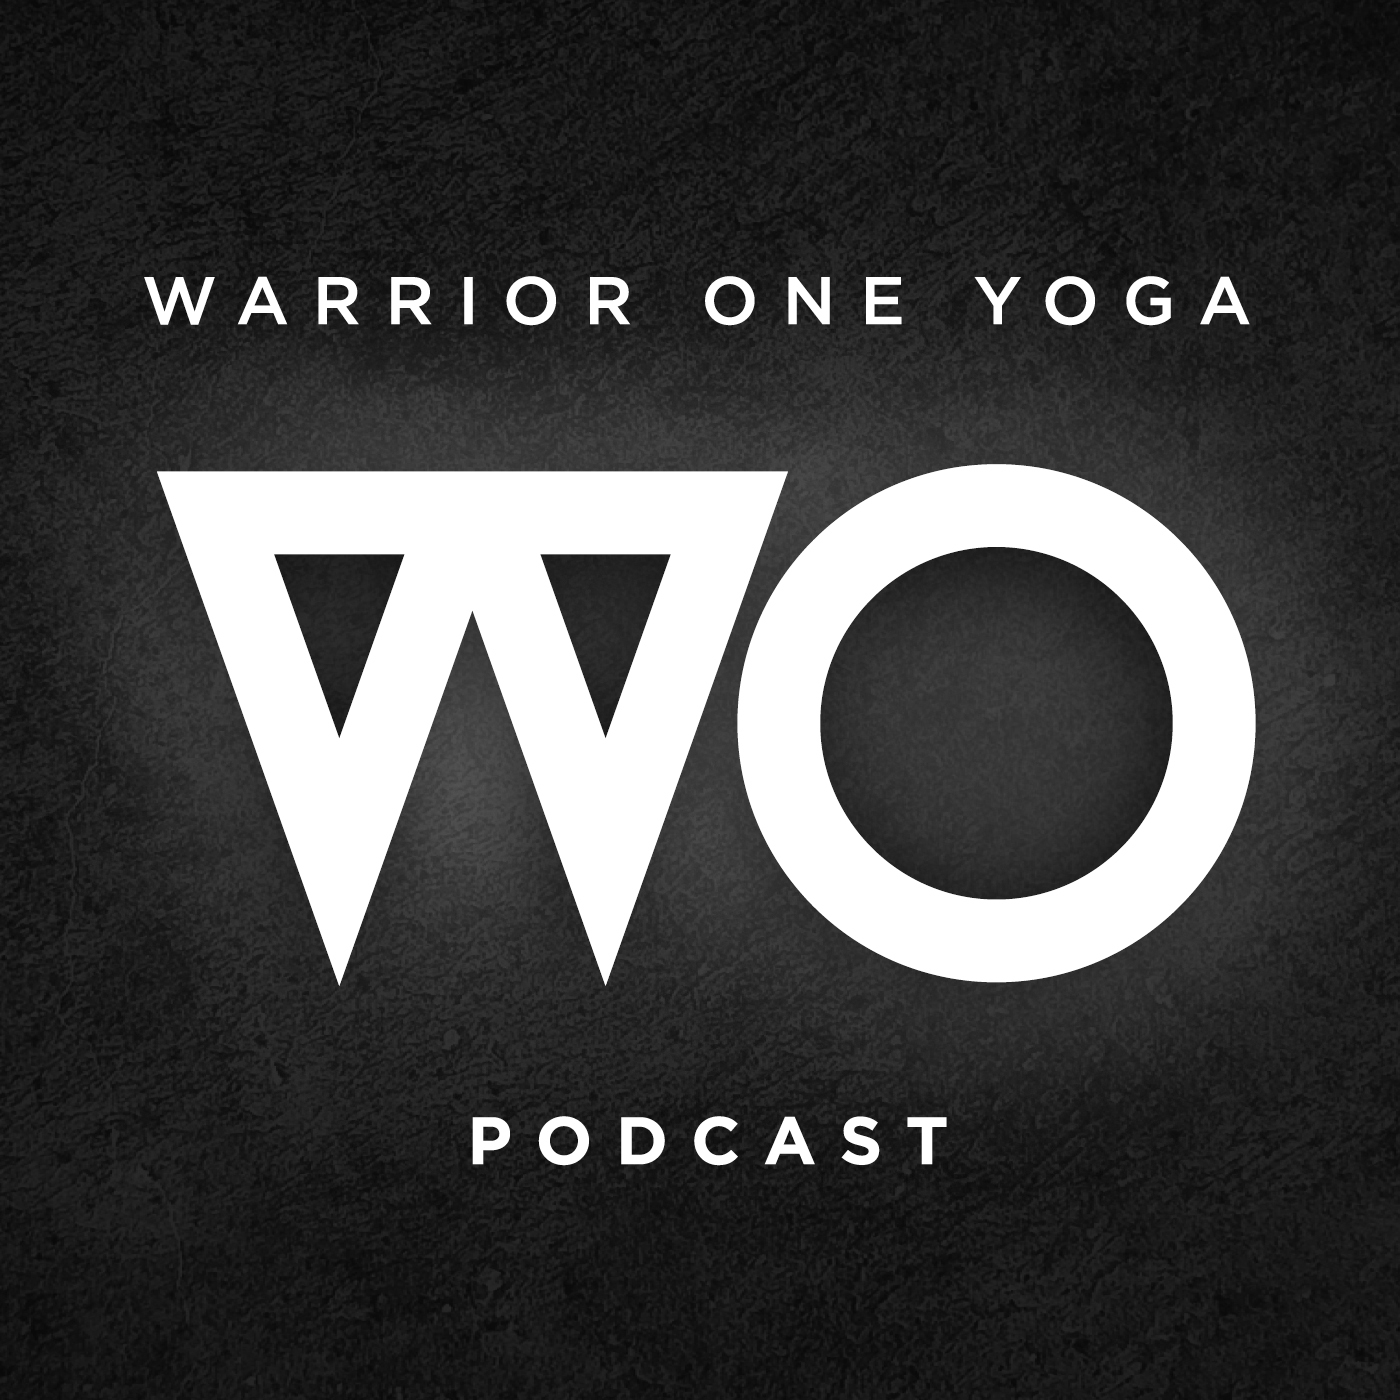 Business of Yoga: 3 pillars of Warrior One Yoga plus 8 key learnings in 8 years